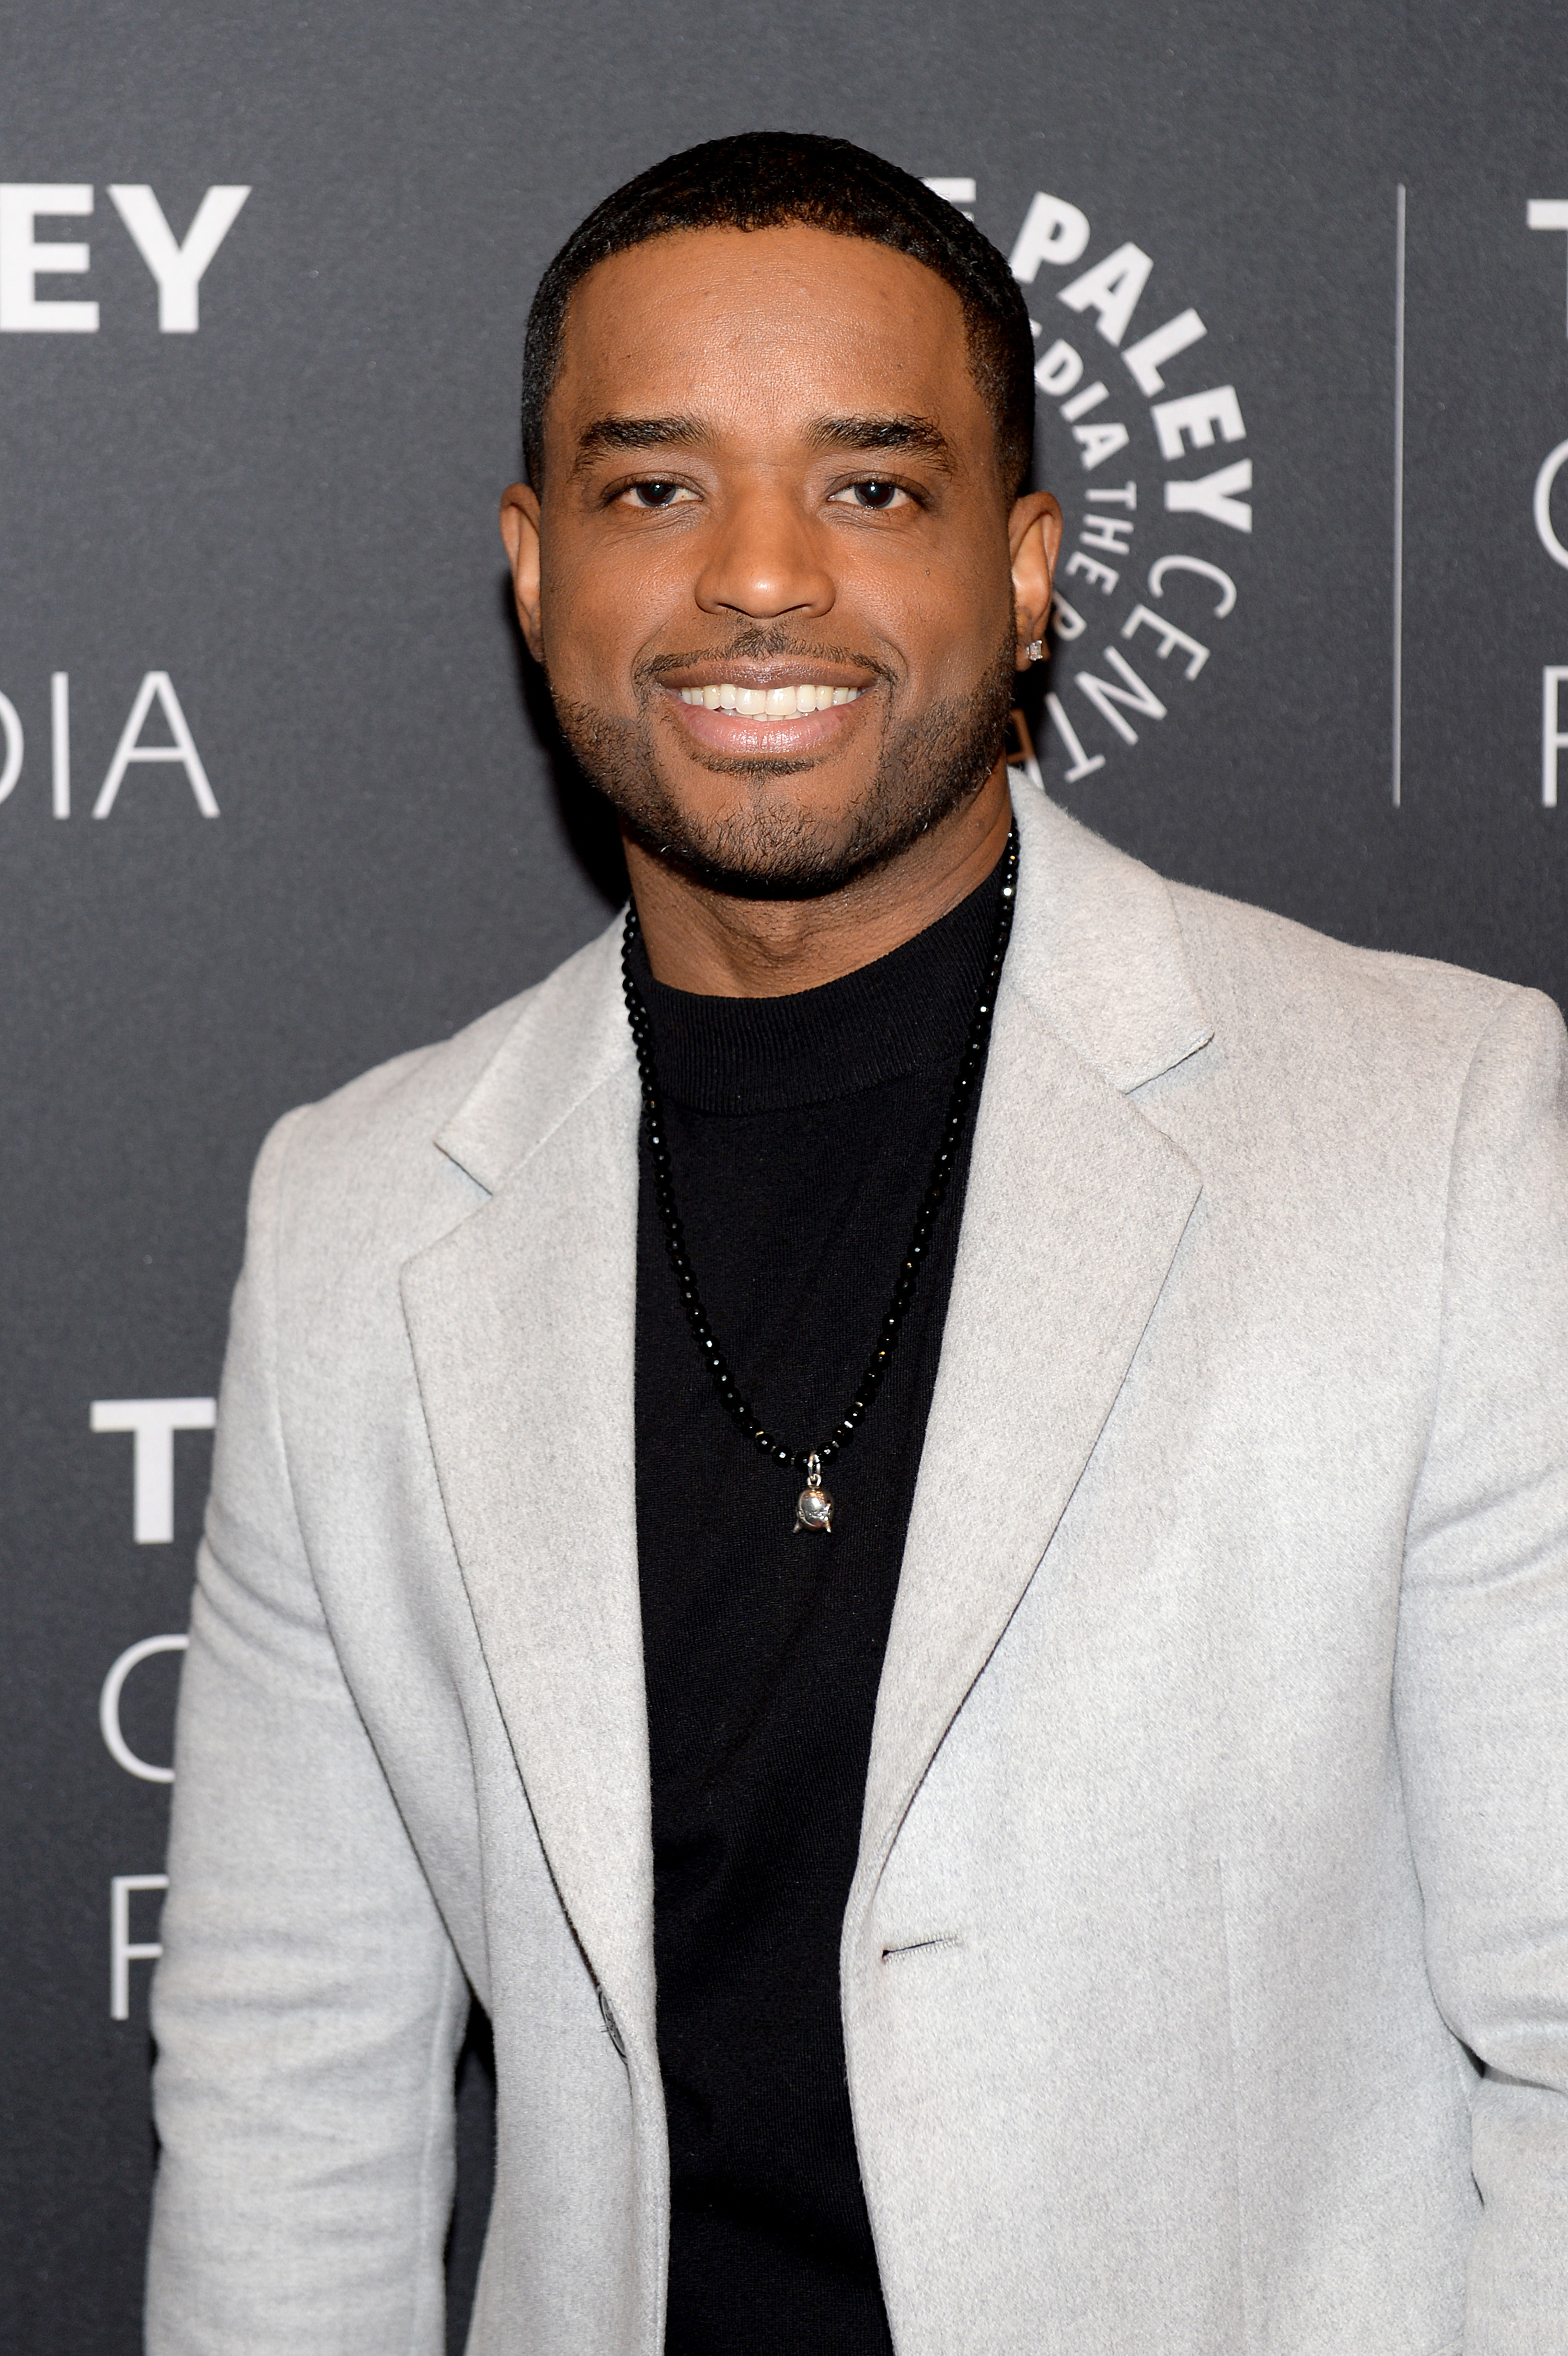 Larenz Tate attends the Power Series Finale Episode Screening at Paley Center on February 07, 2020 in New York City